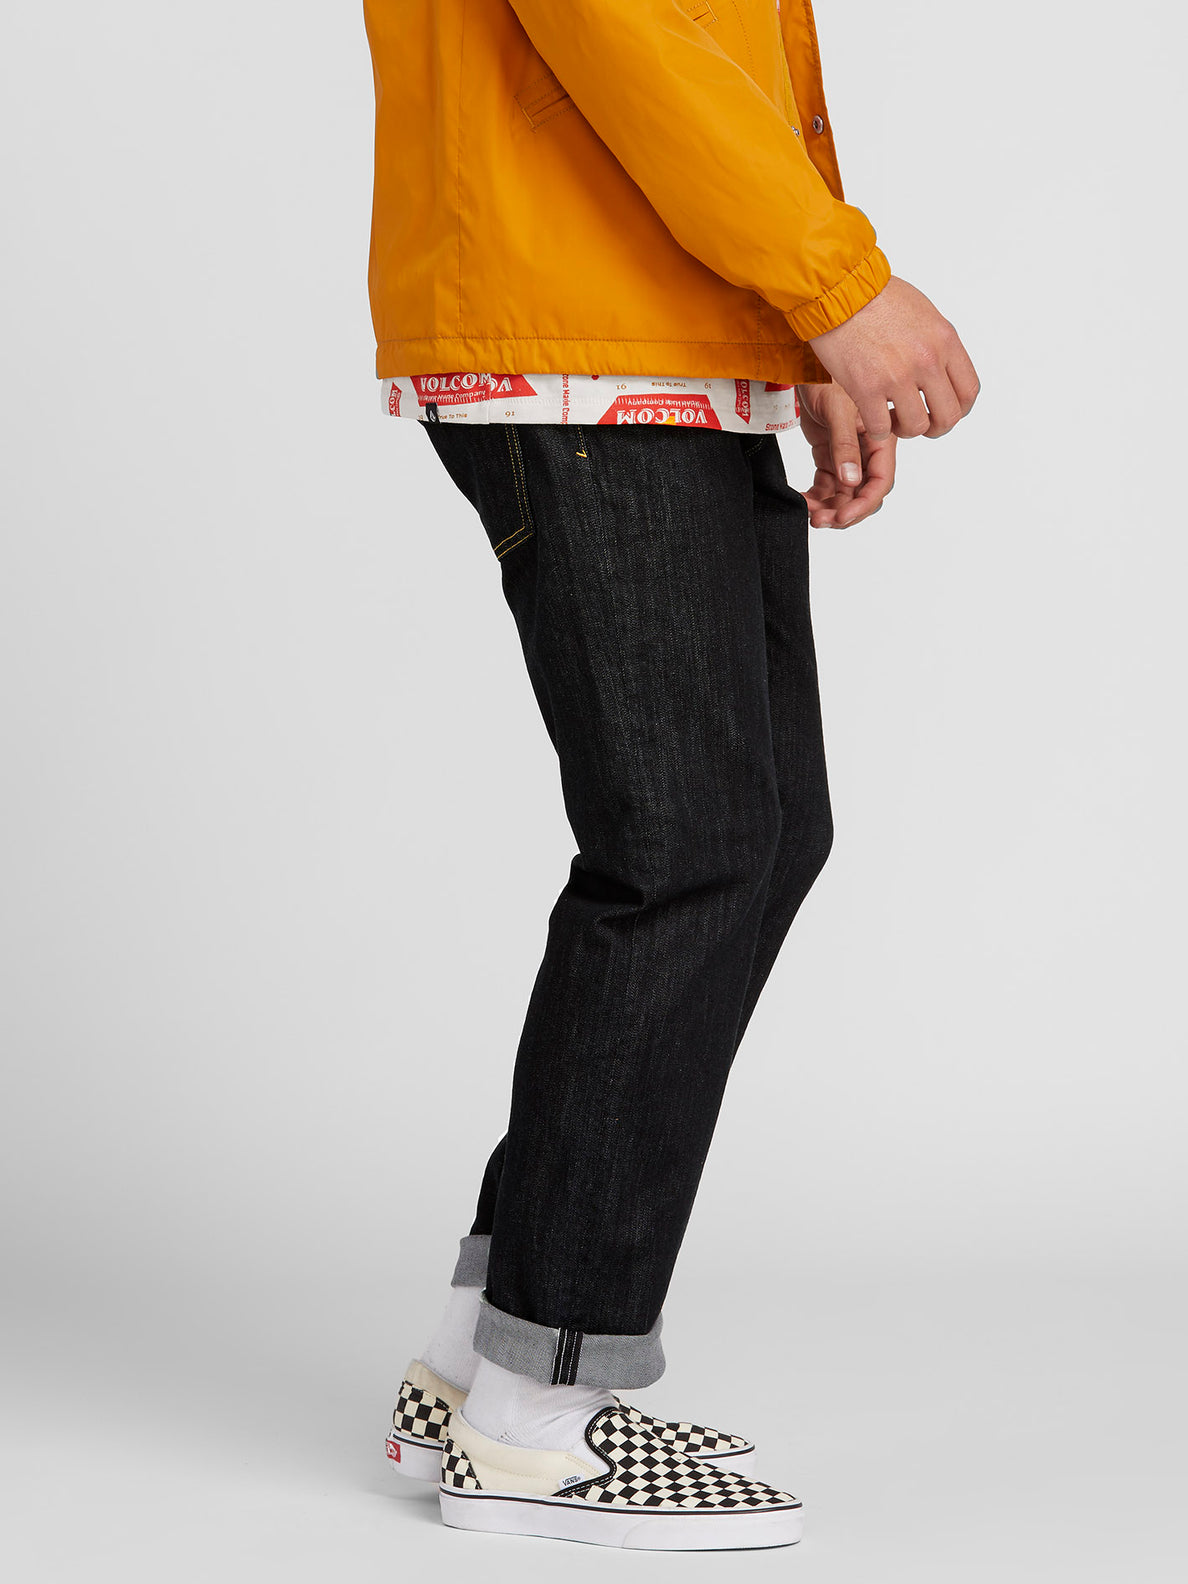 Solver Modern Fit Jeans - Rinse (A1931503_RNS) [3]